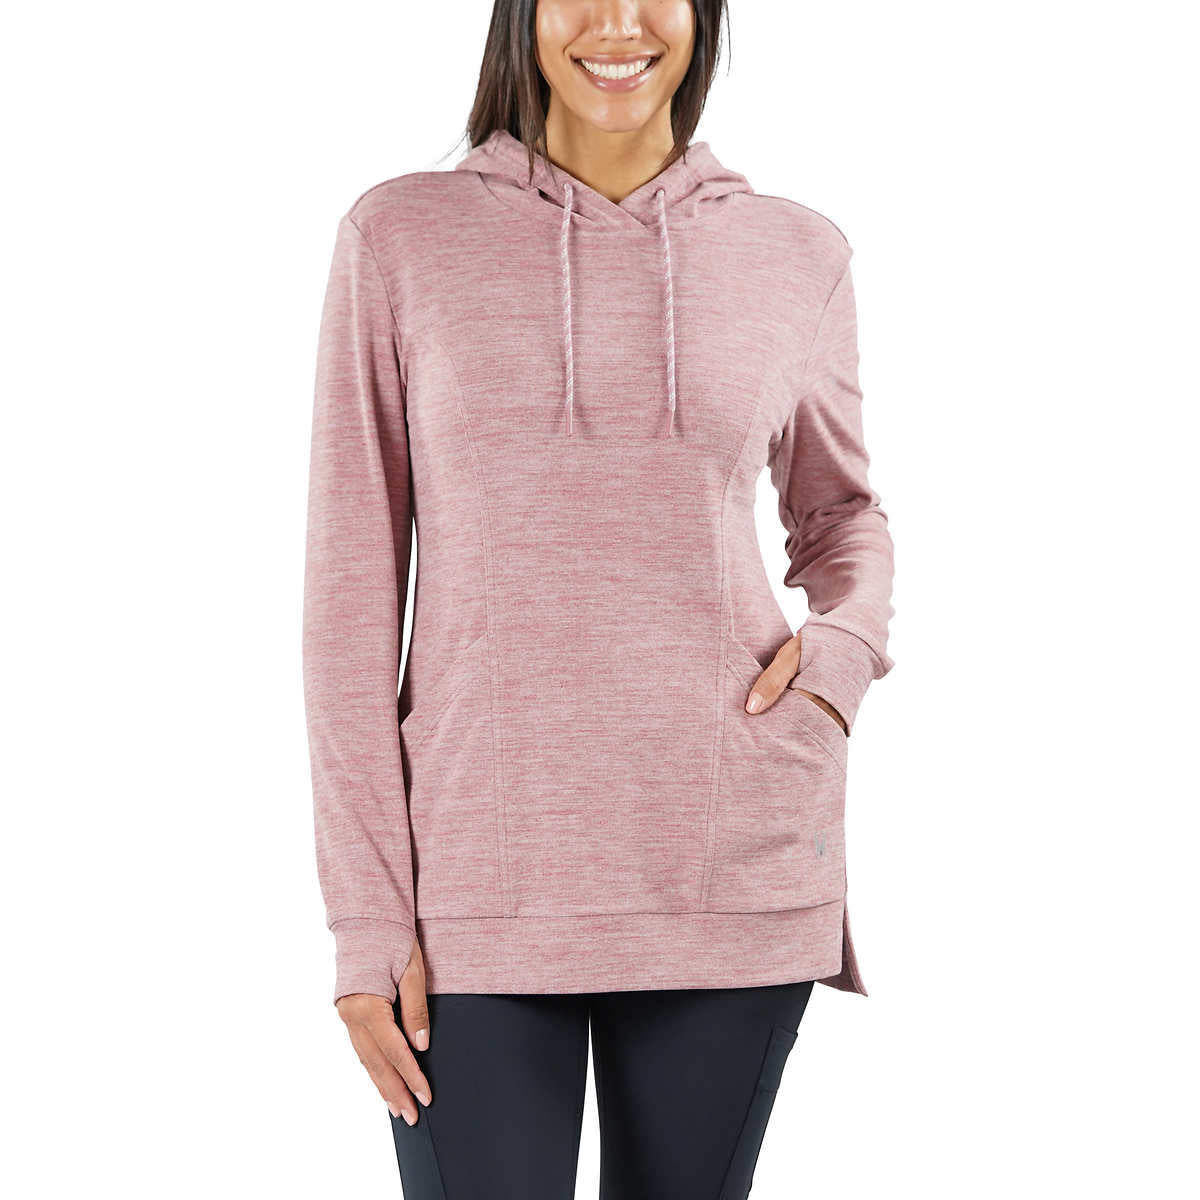 Spyder Women's Moister Wicking Brushed Fabric Active Top Thumb Holes Tunic Length Hoodie